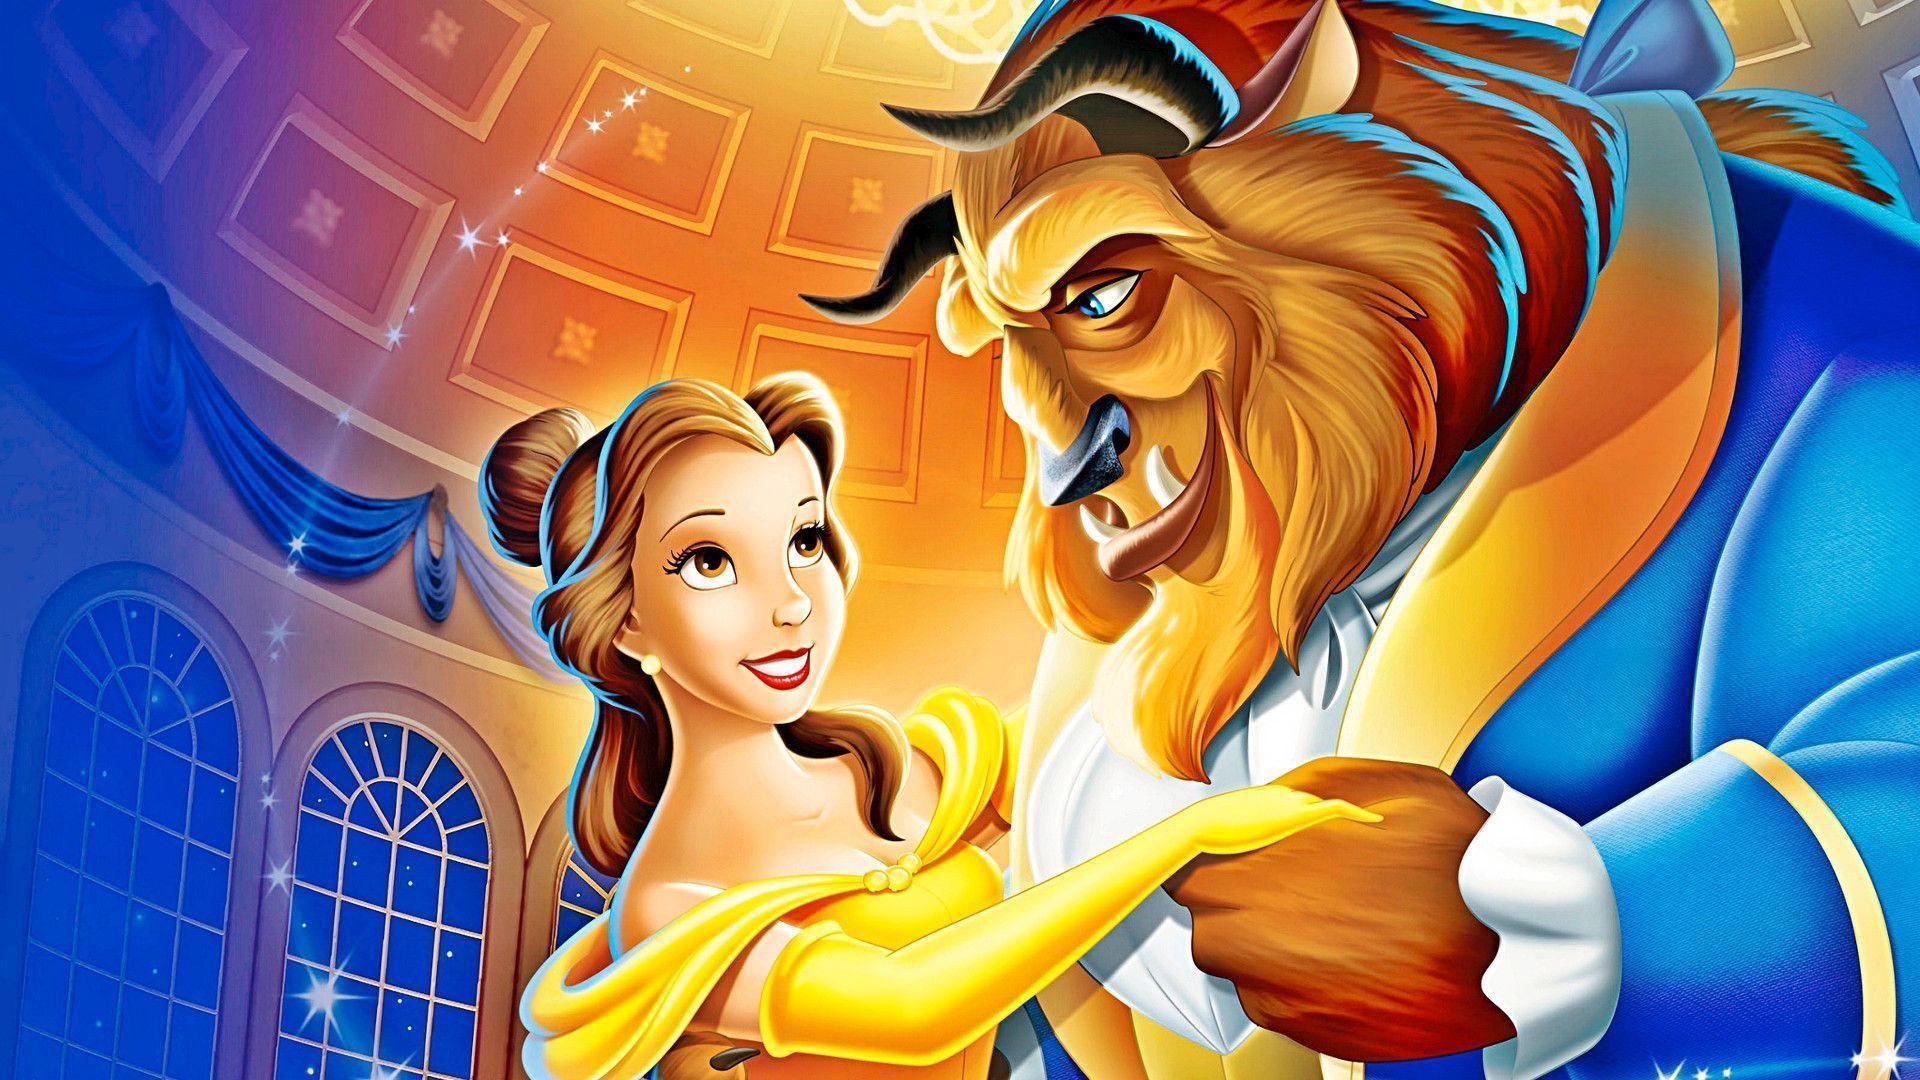 Beauty And The Beast Wallpaper. Beauty And The Beast Background